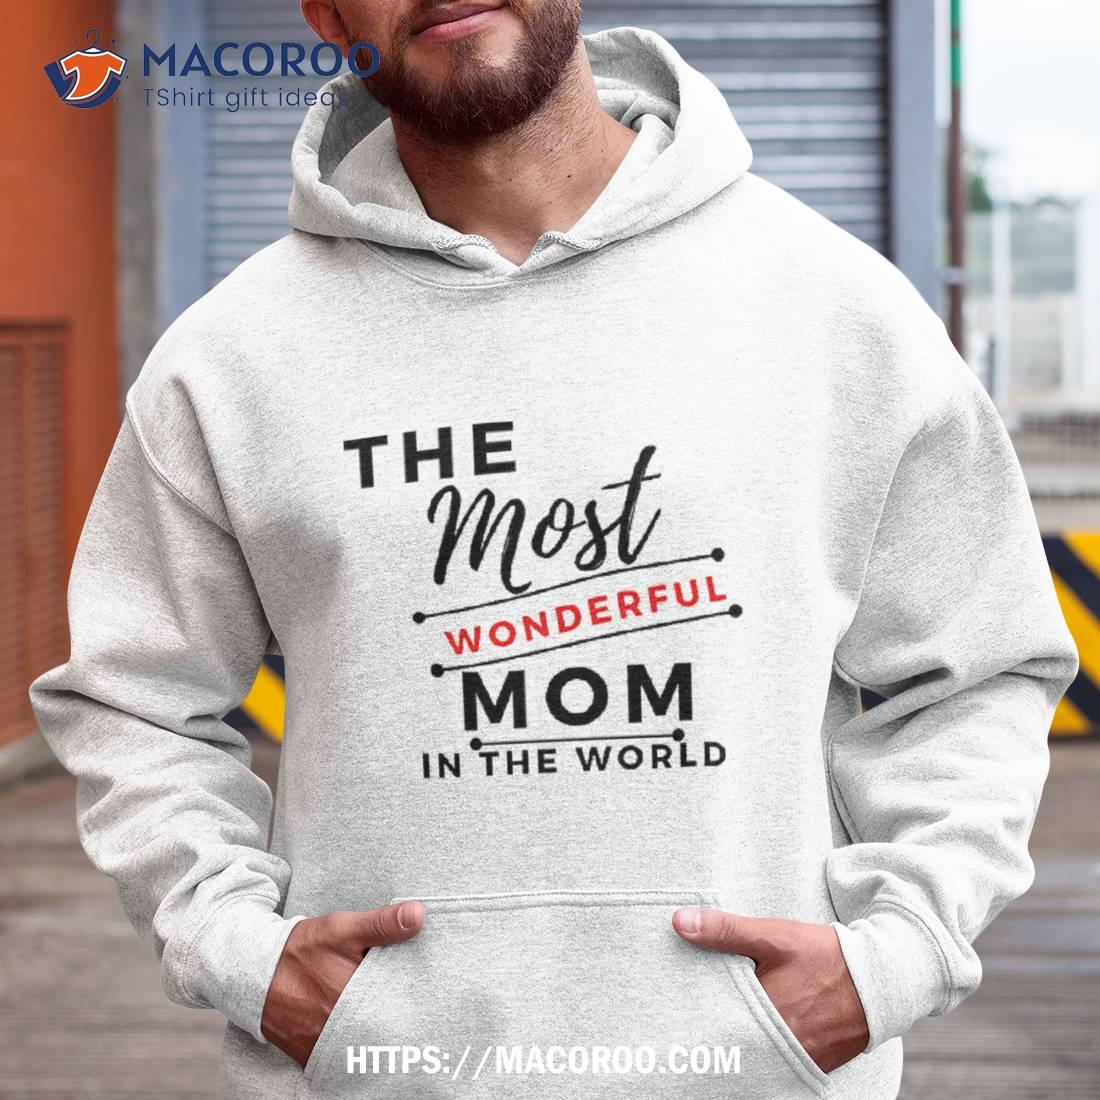 https://images.macoroo.com/wp-content/uploads/2023/08/the-most-wonderful-mom-mom-gift-shirt-christmas-gifts-for-my-mom-hoodie.jpg